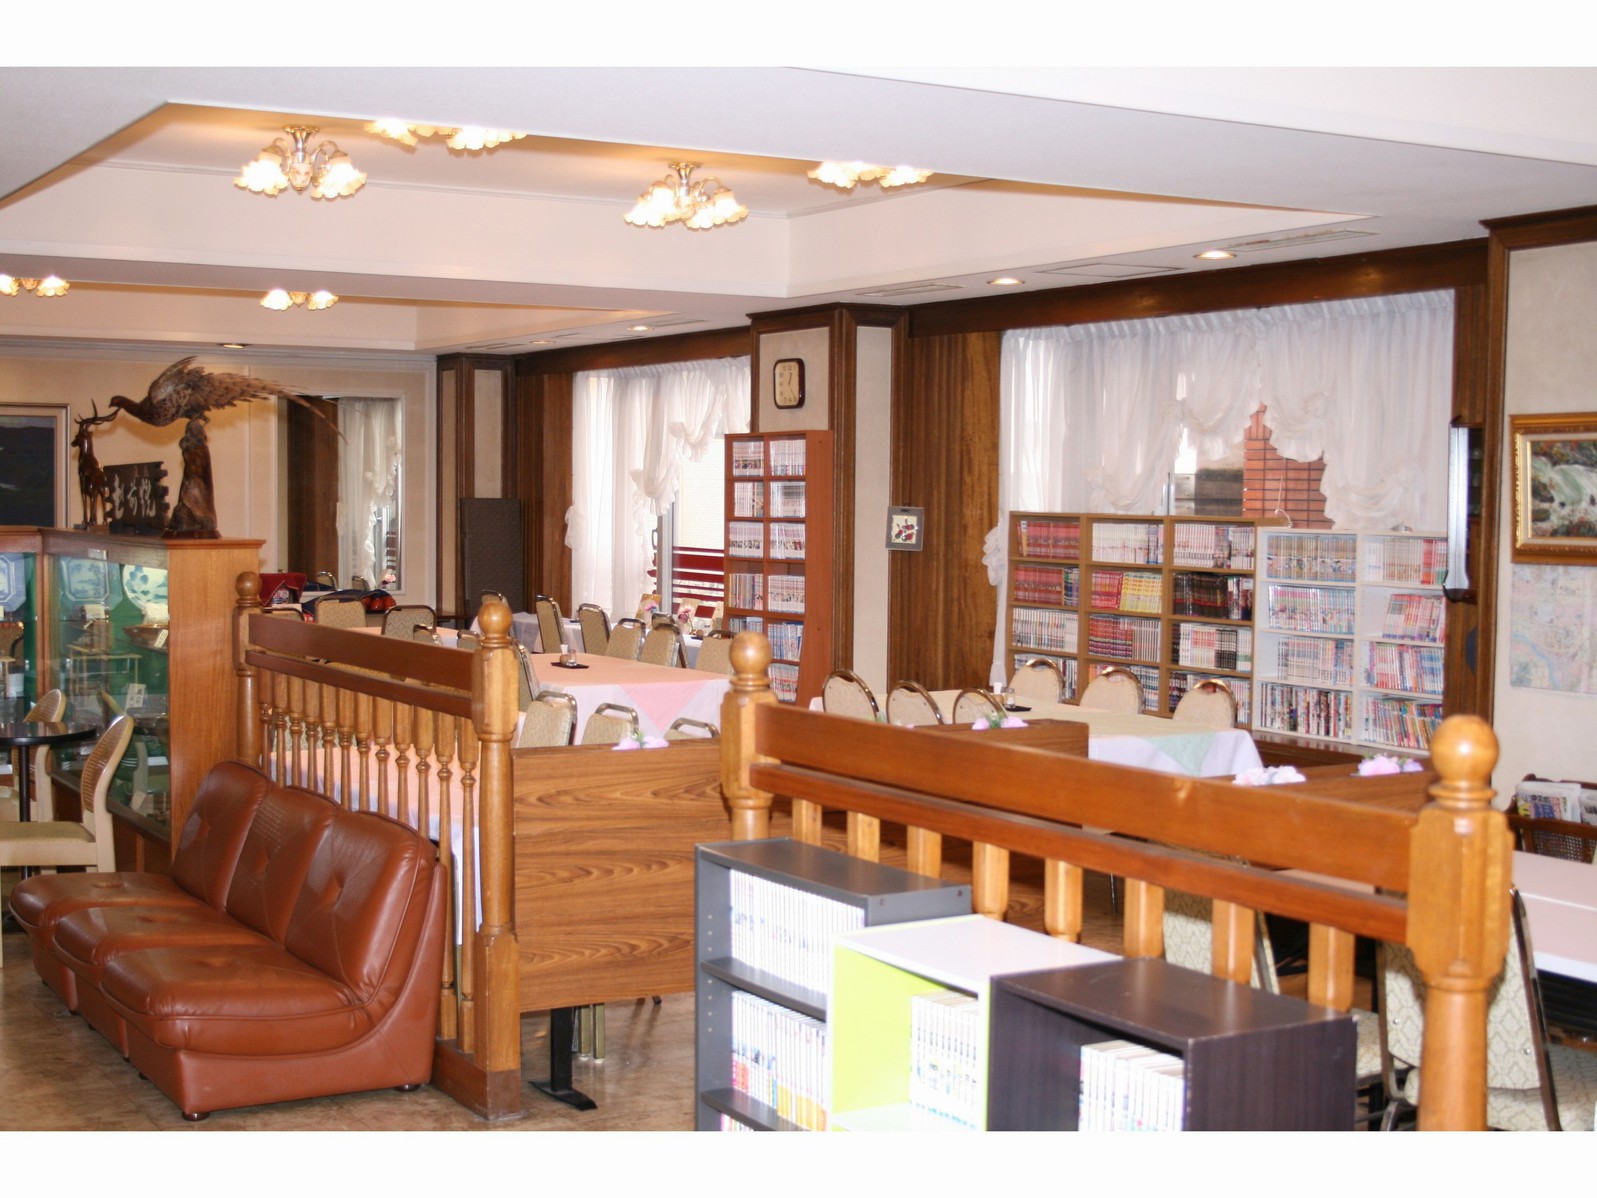 Fukui Palace Inn Fukui Palace Inn is a popular choice amongst travelers in Fukui, whether exploring or just passing through. Offering a variety of facilities and services, the property provides all you need for a good